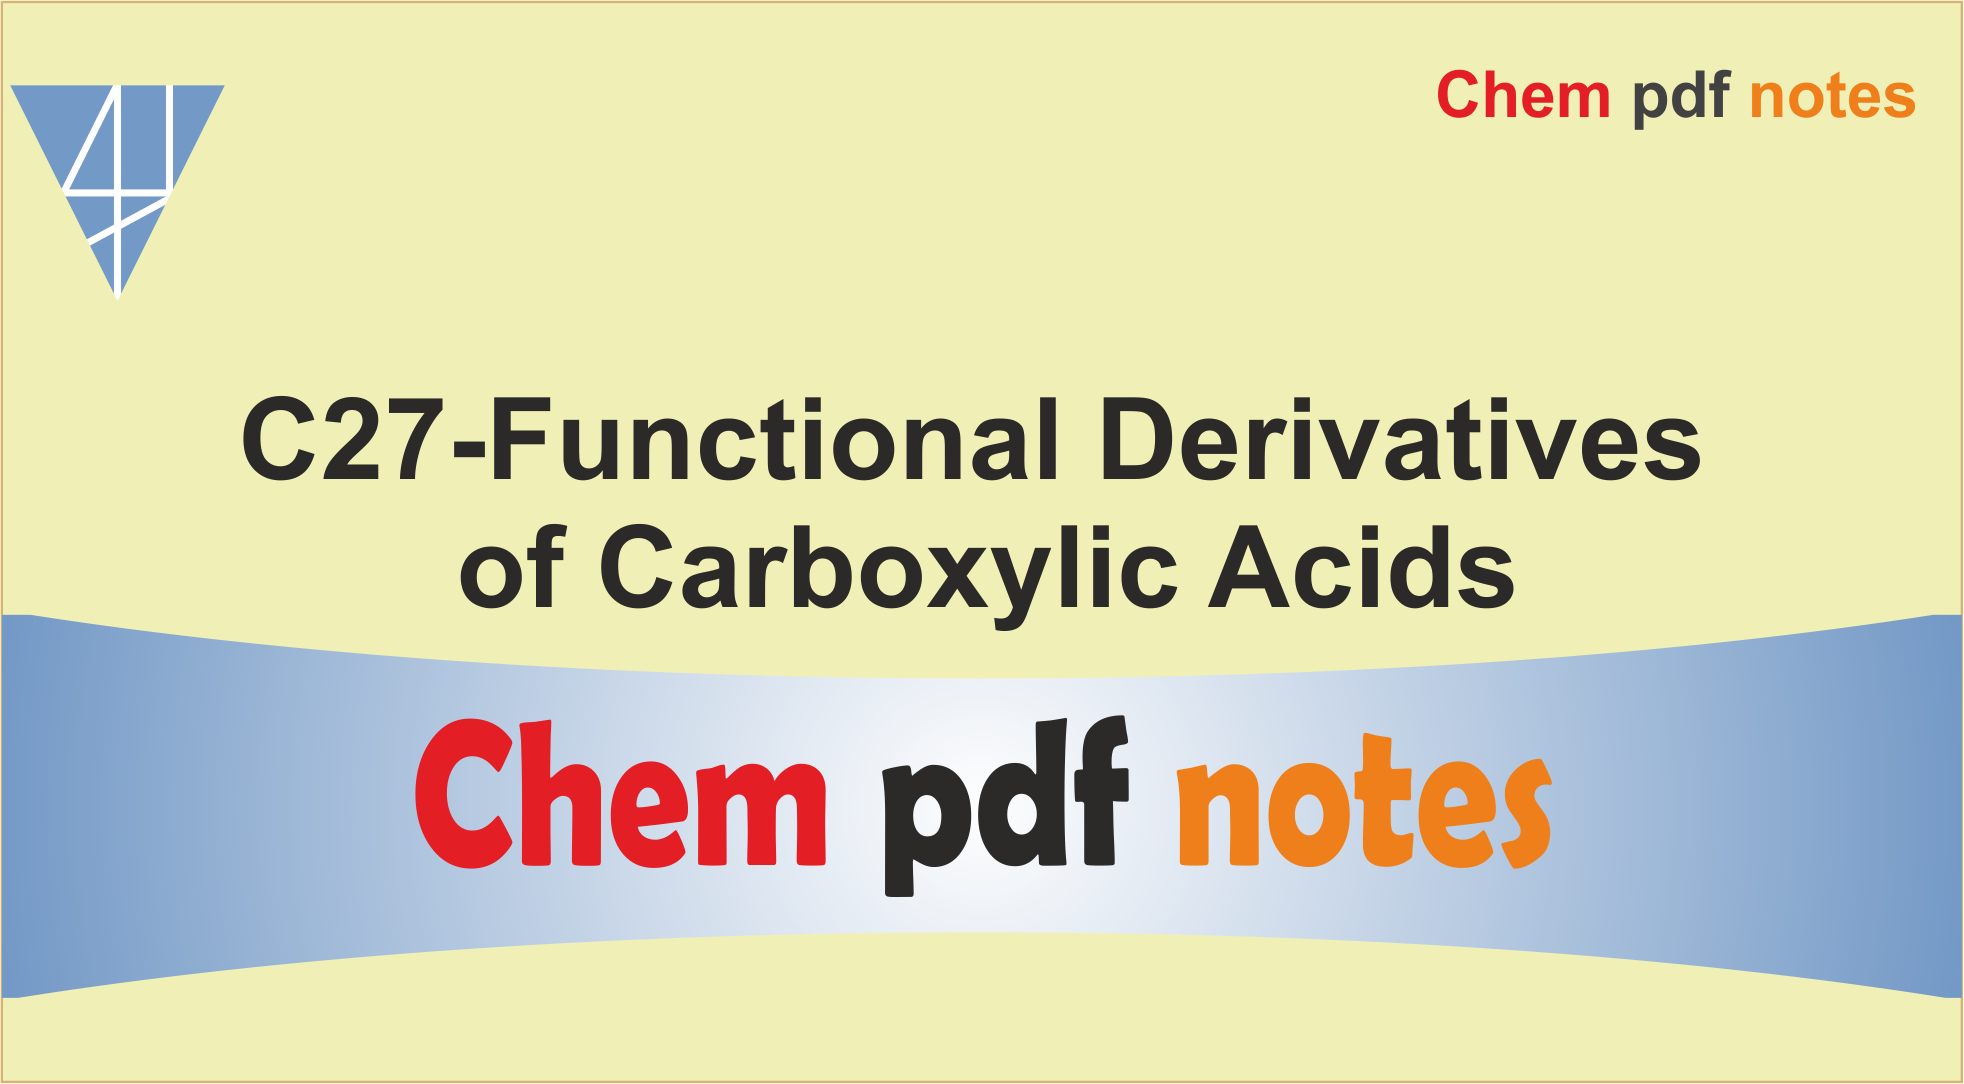 C27-Functional Derivatives of Carboxylic Acids